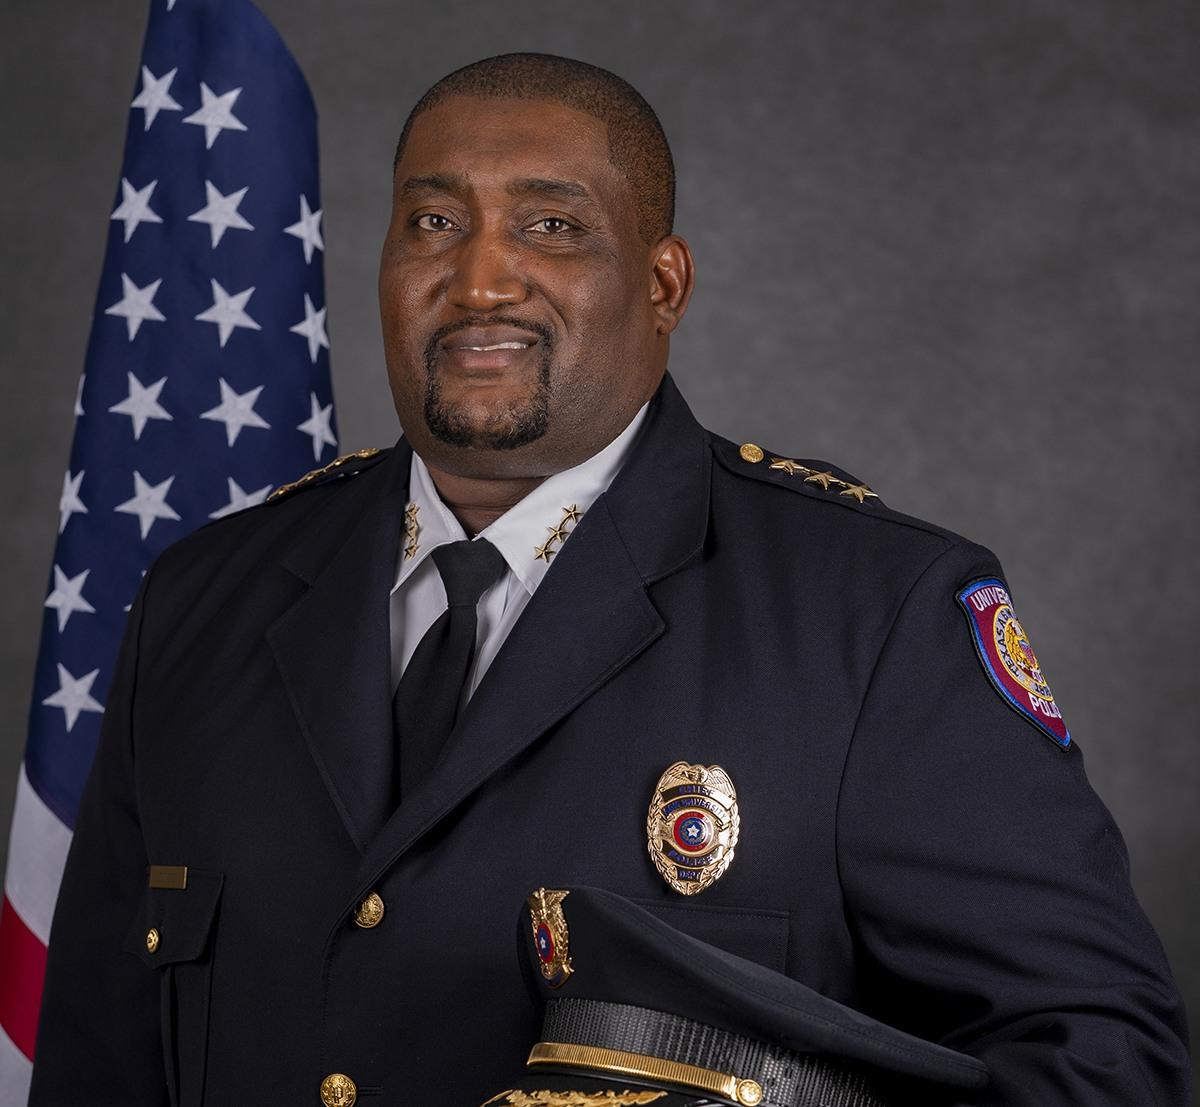 Texas A&M University Police Department named Mike Johnson new Police Chief and he will assume his new post Sept. 1.